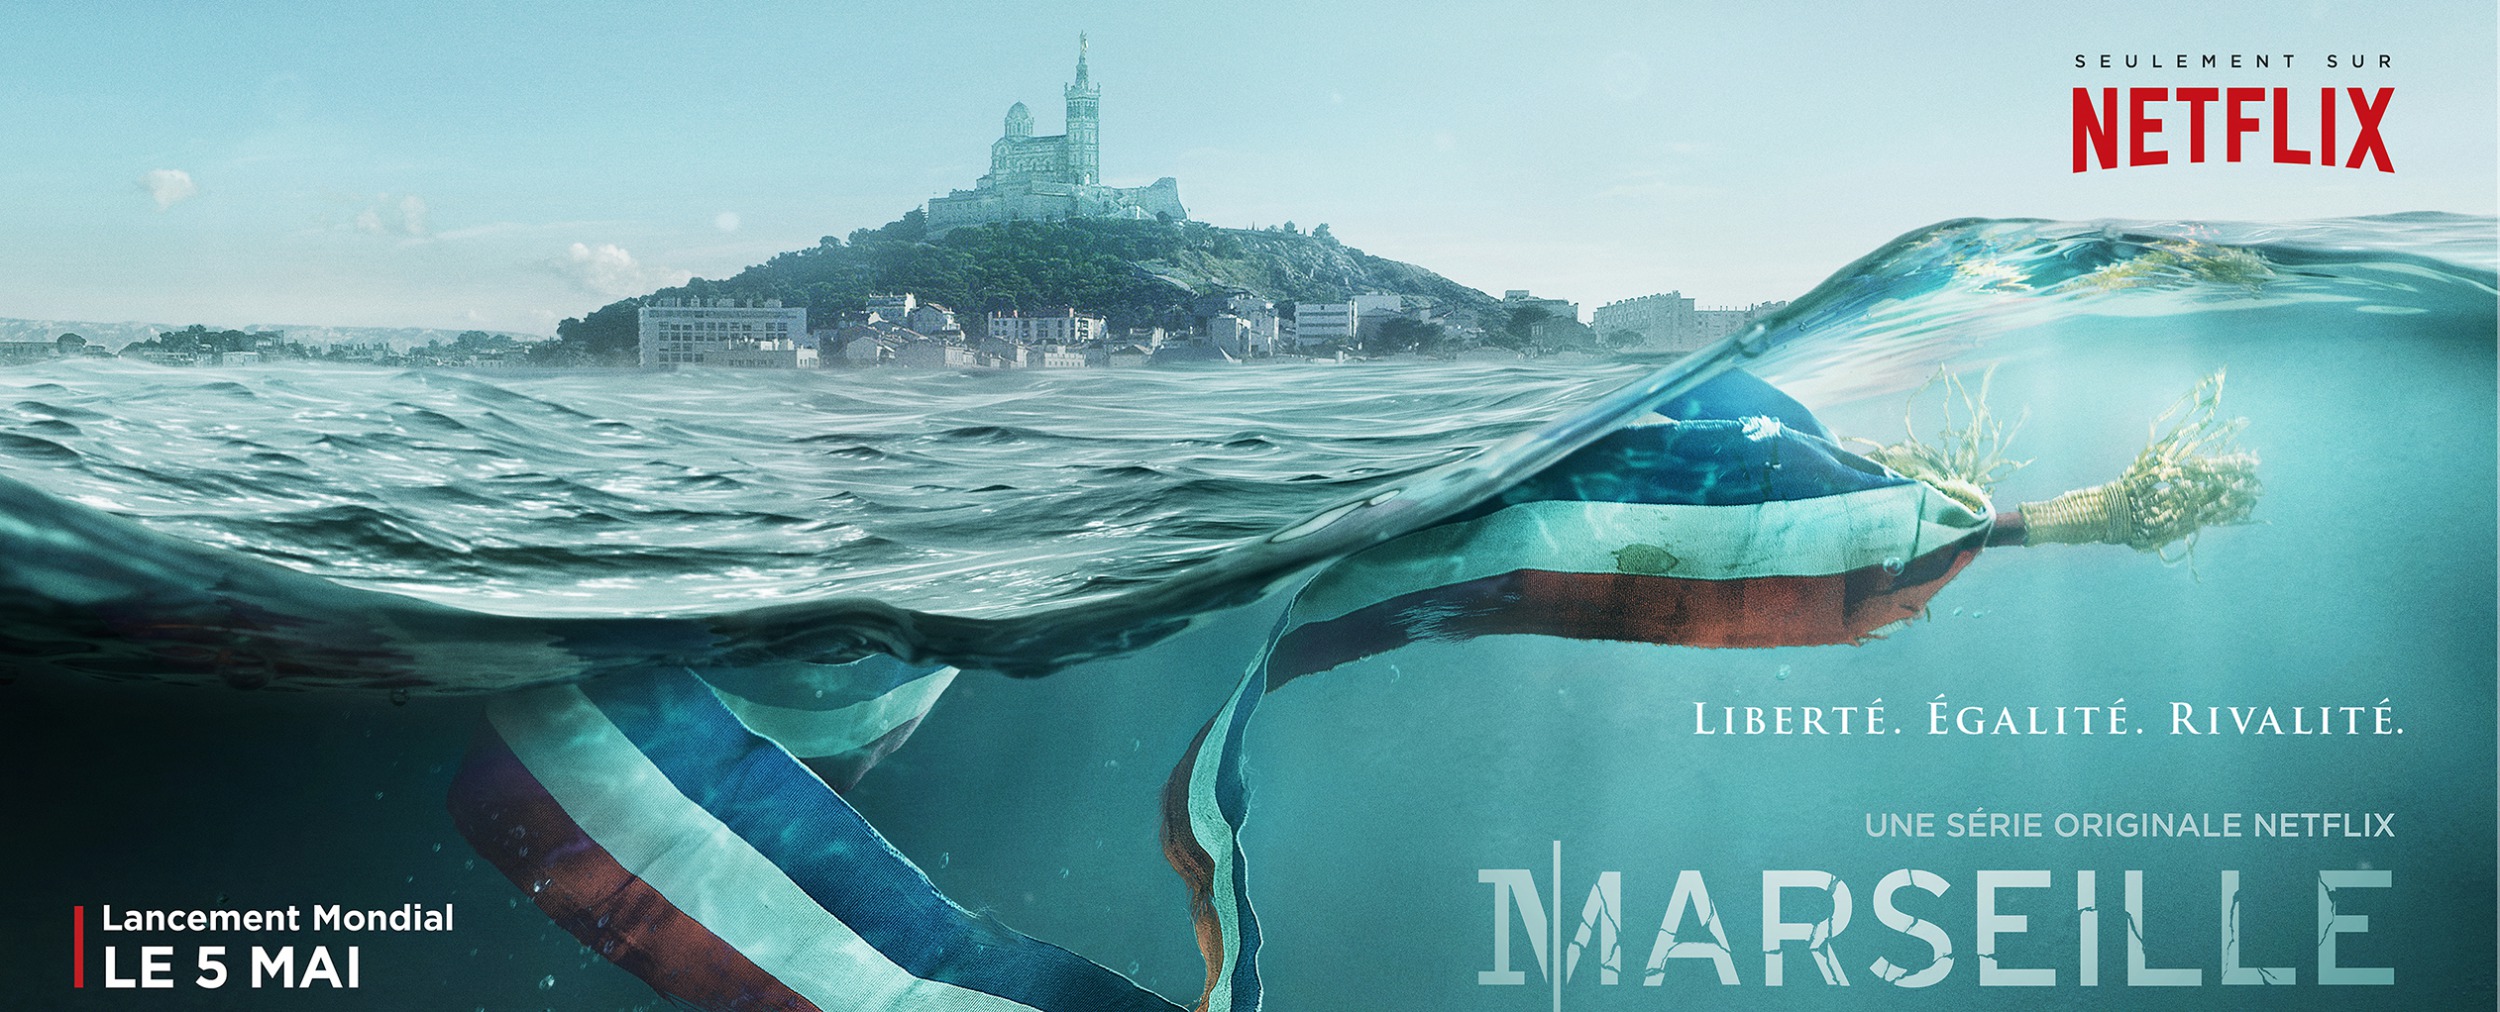 Mega Sized TV Poster Image for Marseille (#5 of 15)